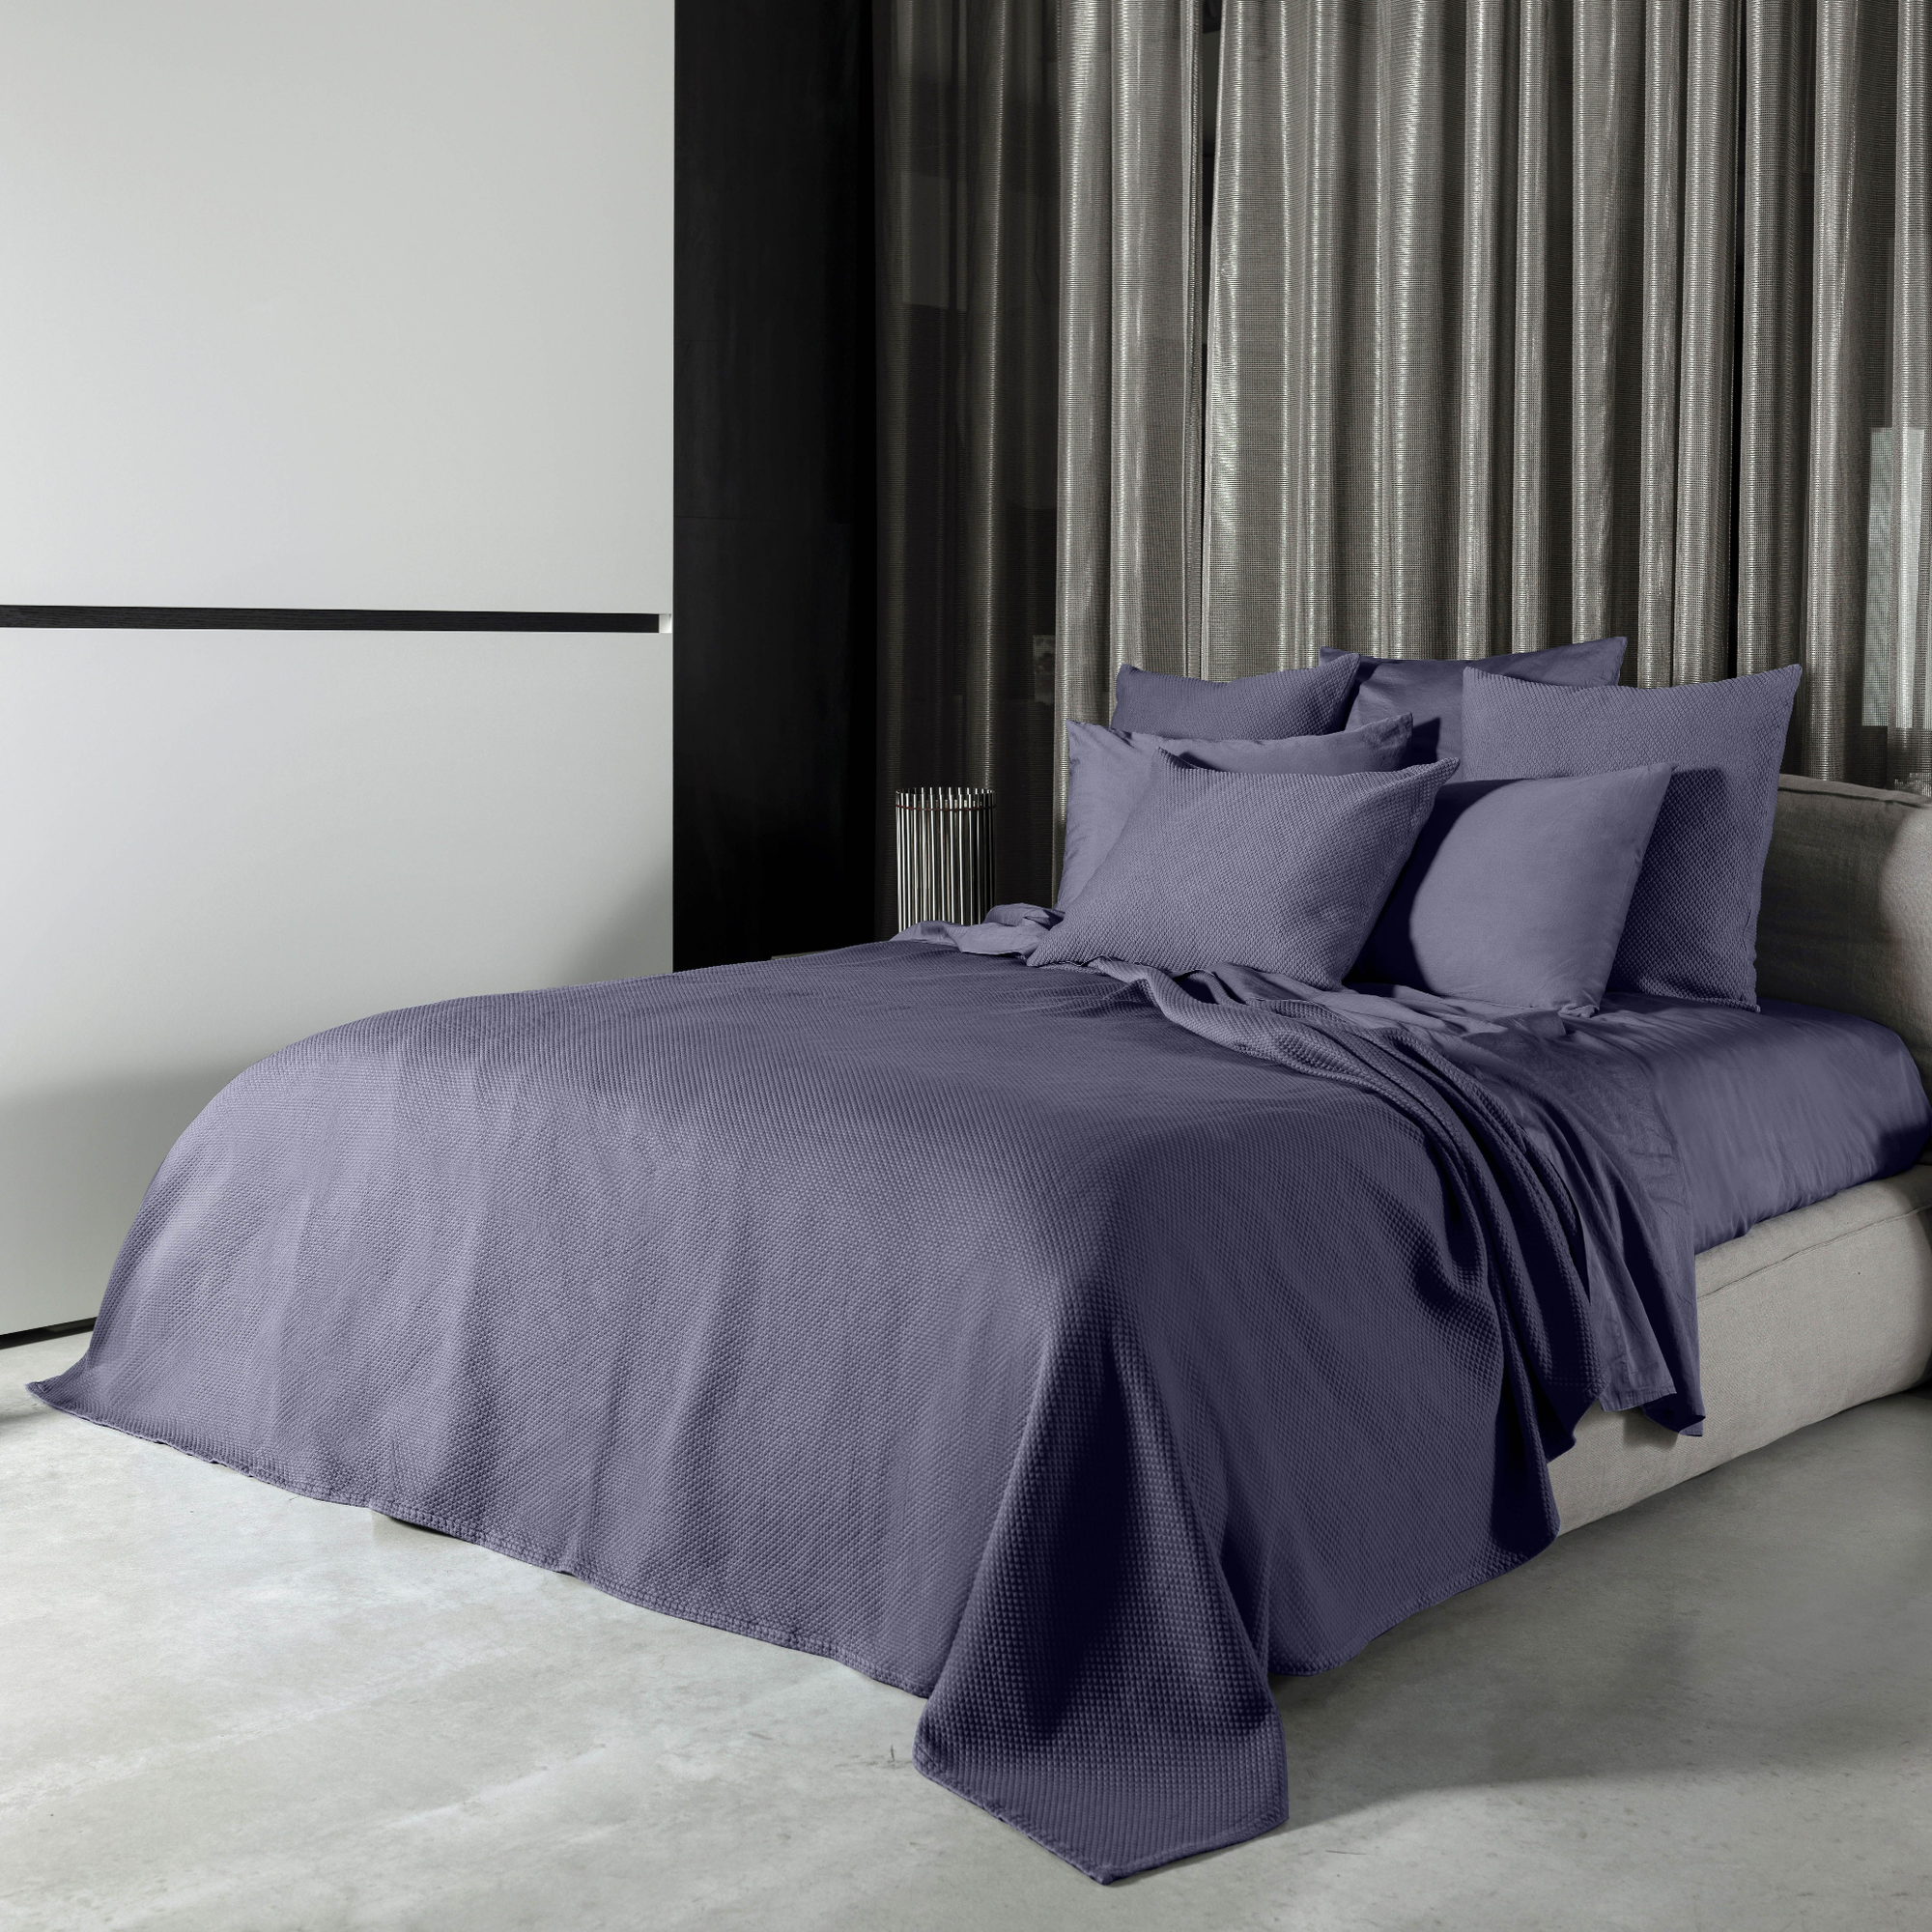 Amethyst Signoria Olivia Coverlet and Shams on a Bed in a Room